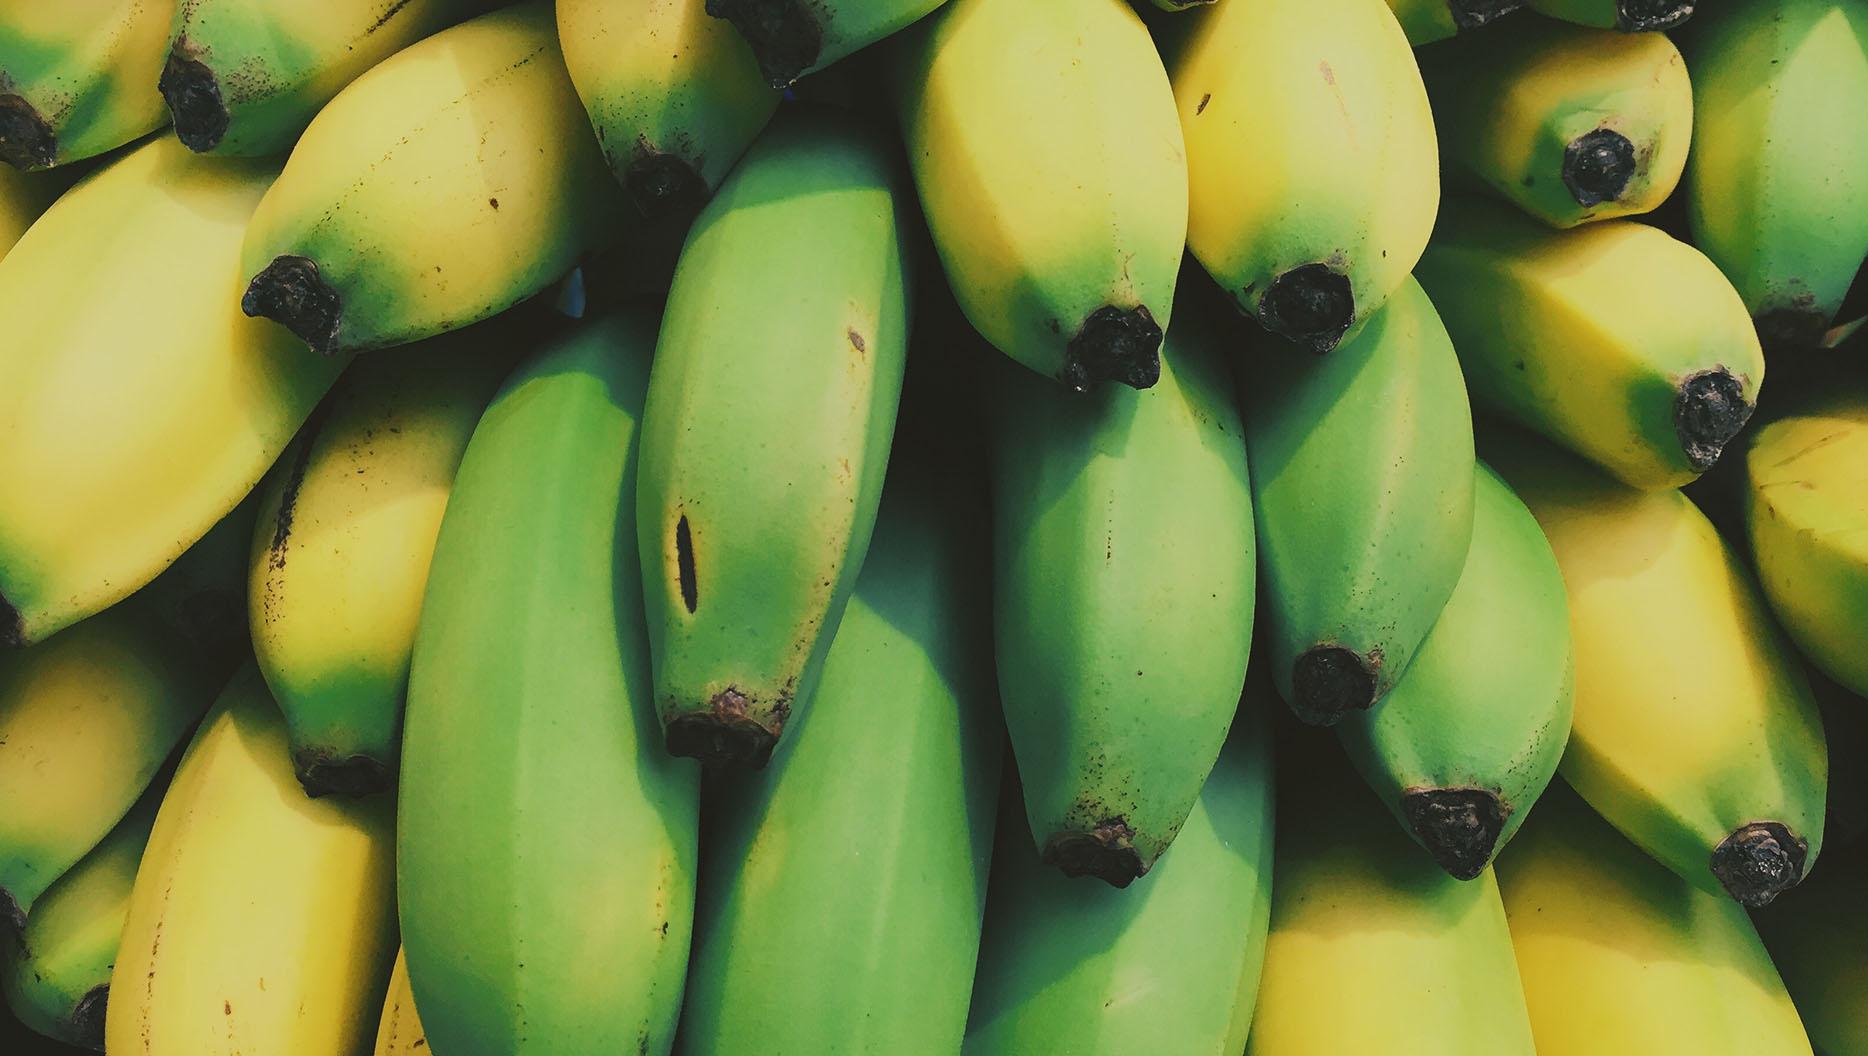 Eyes to See, Ears to Hear, or What Do Bananas Have to Do with the Work of the Spirit? Featured Image